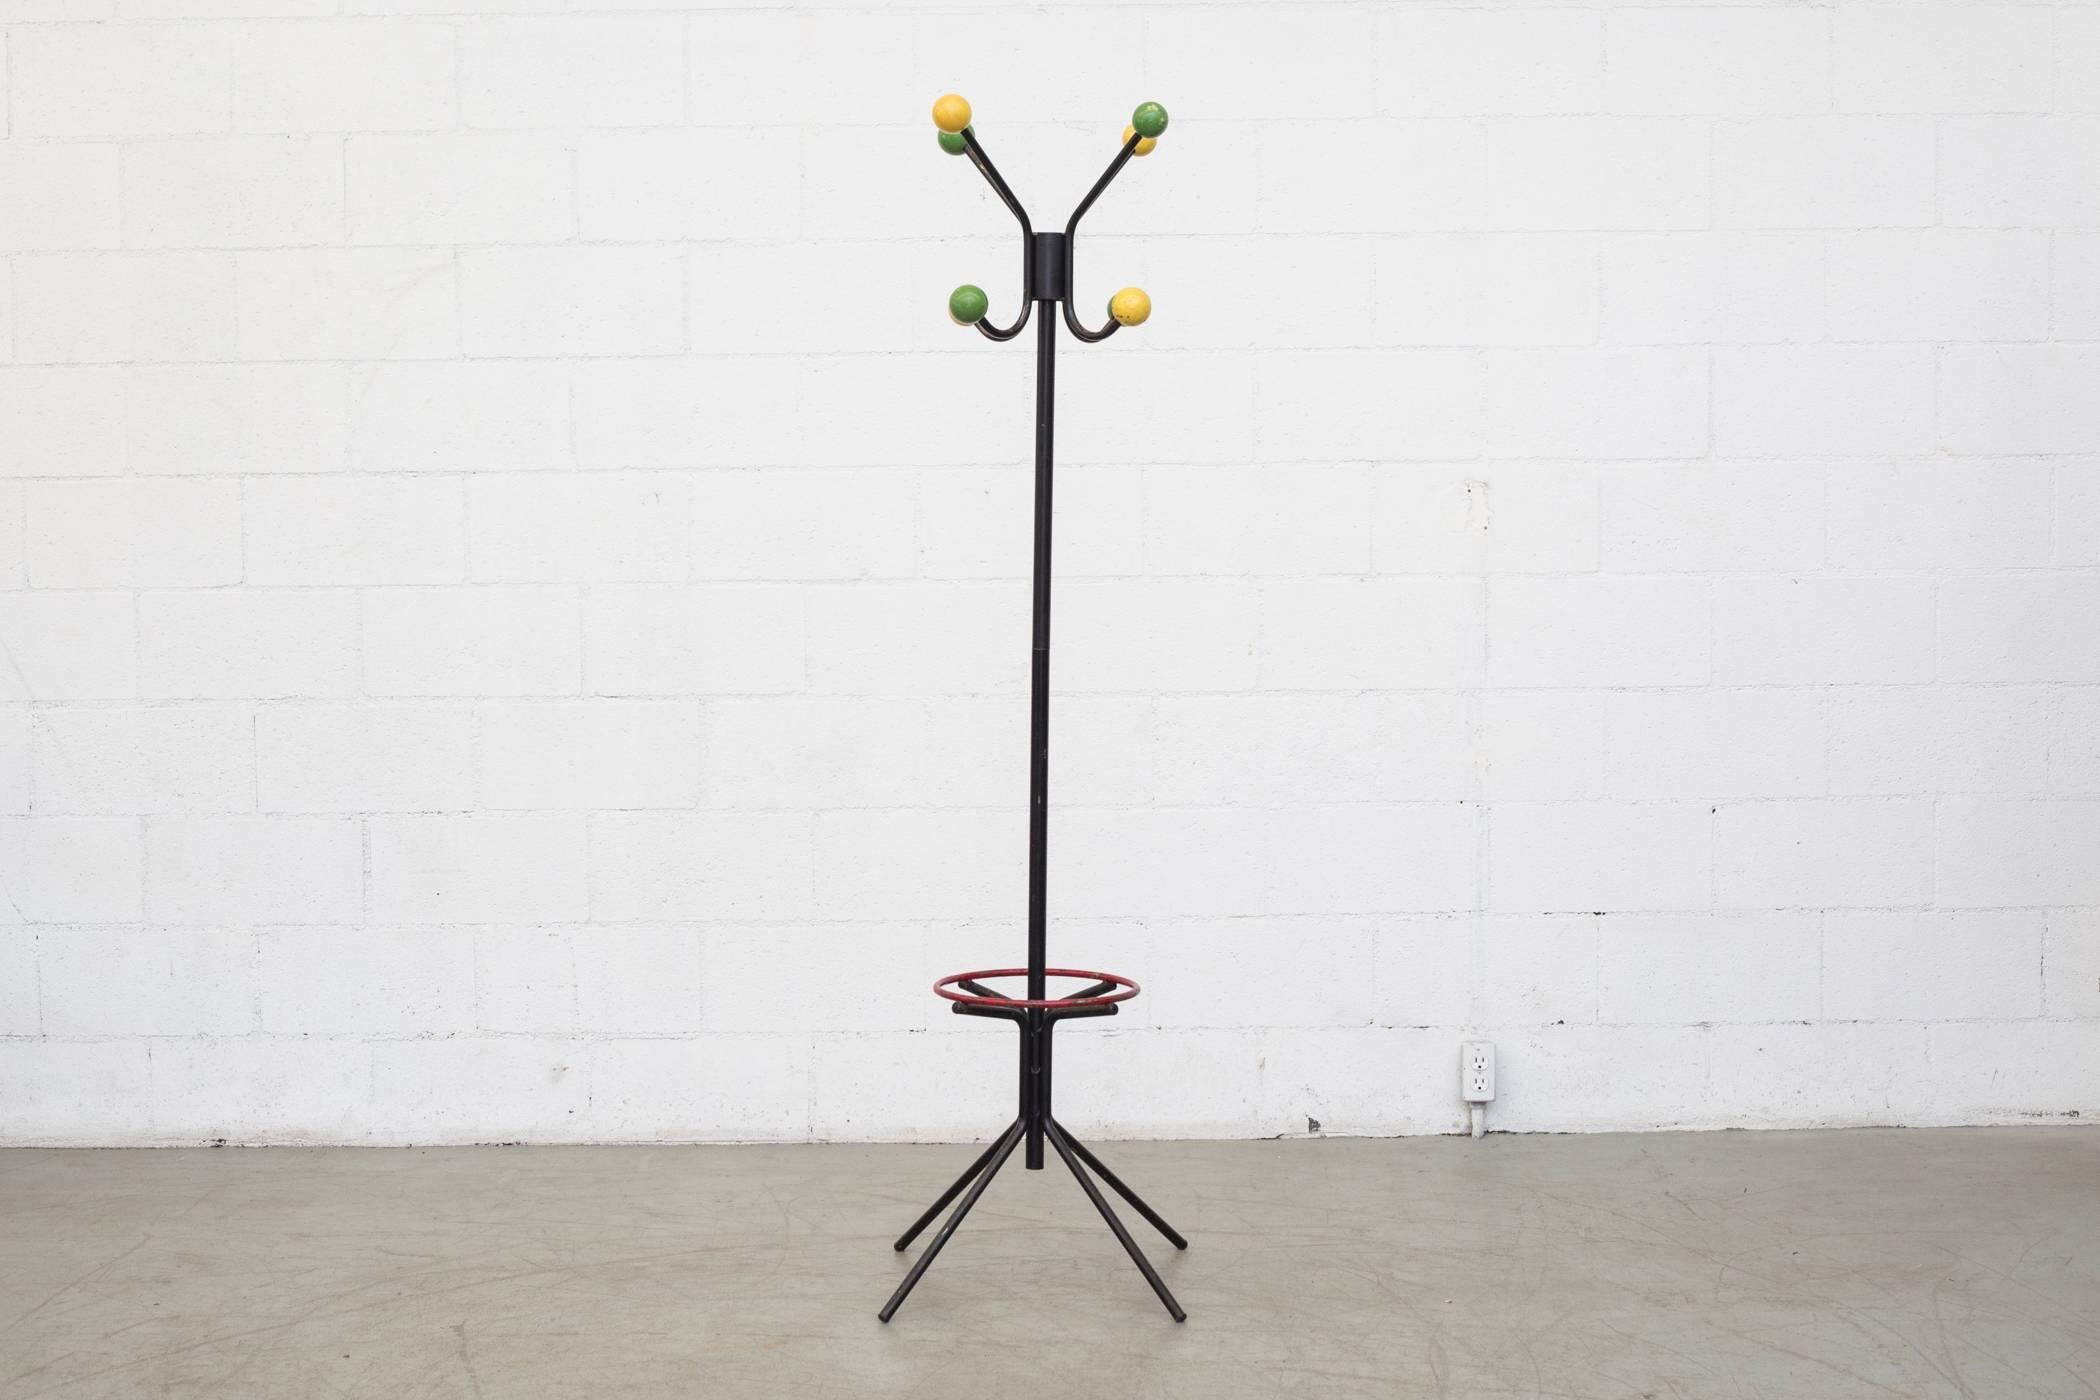 Black enameled metal coat rack with colored wood balls and red enameled metal ring for umbrellas. The pole can be detached. Original condition with visible patina and wear.